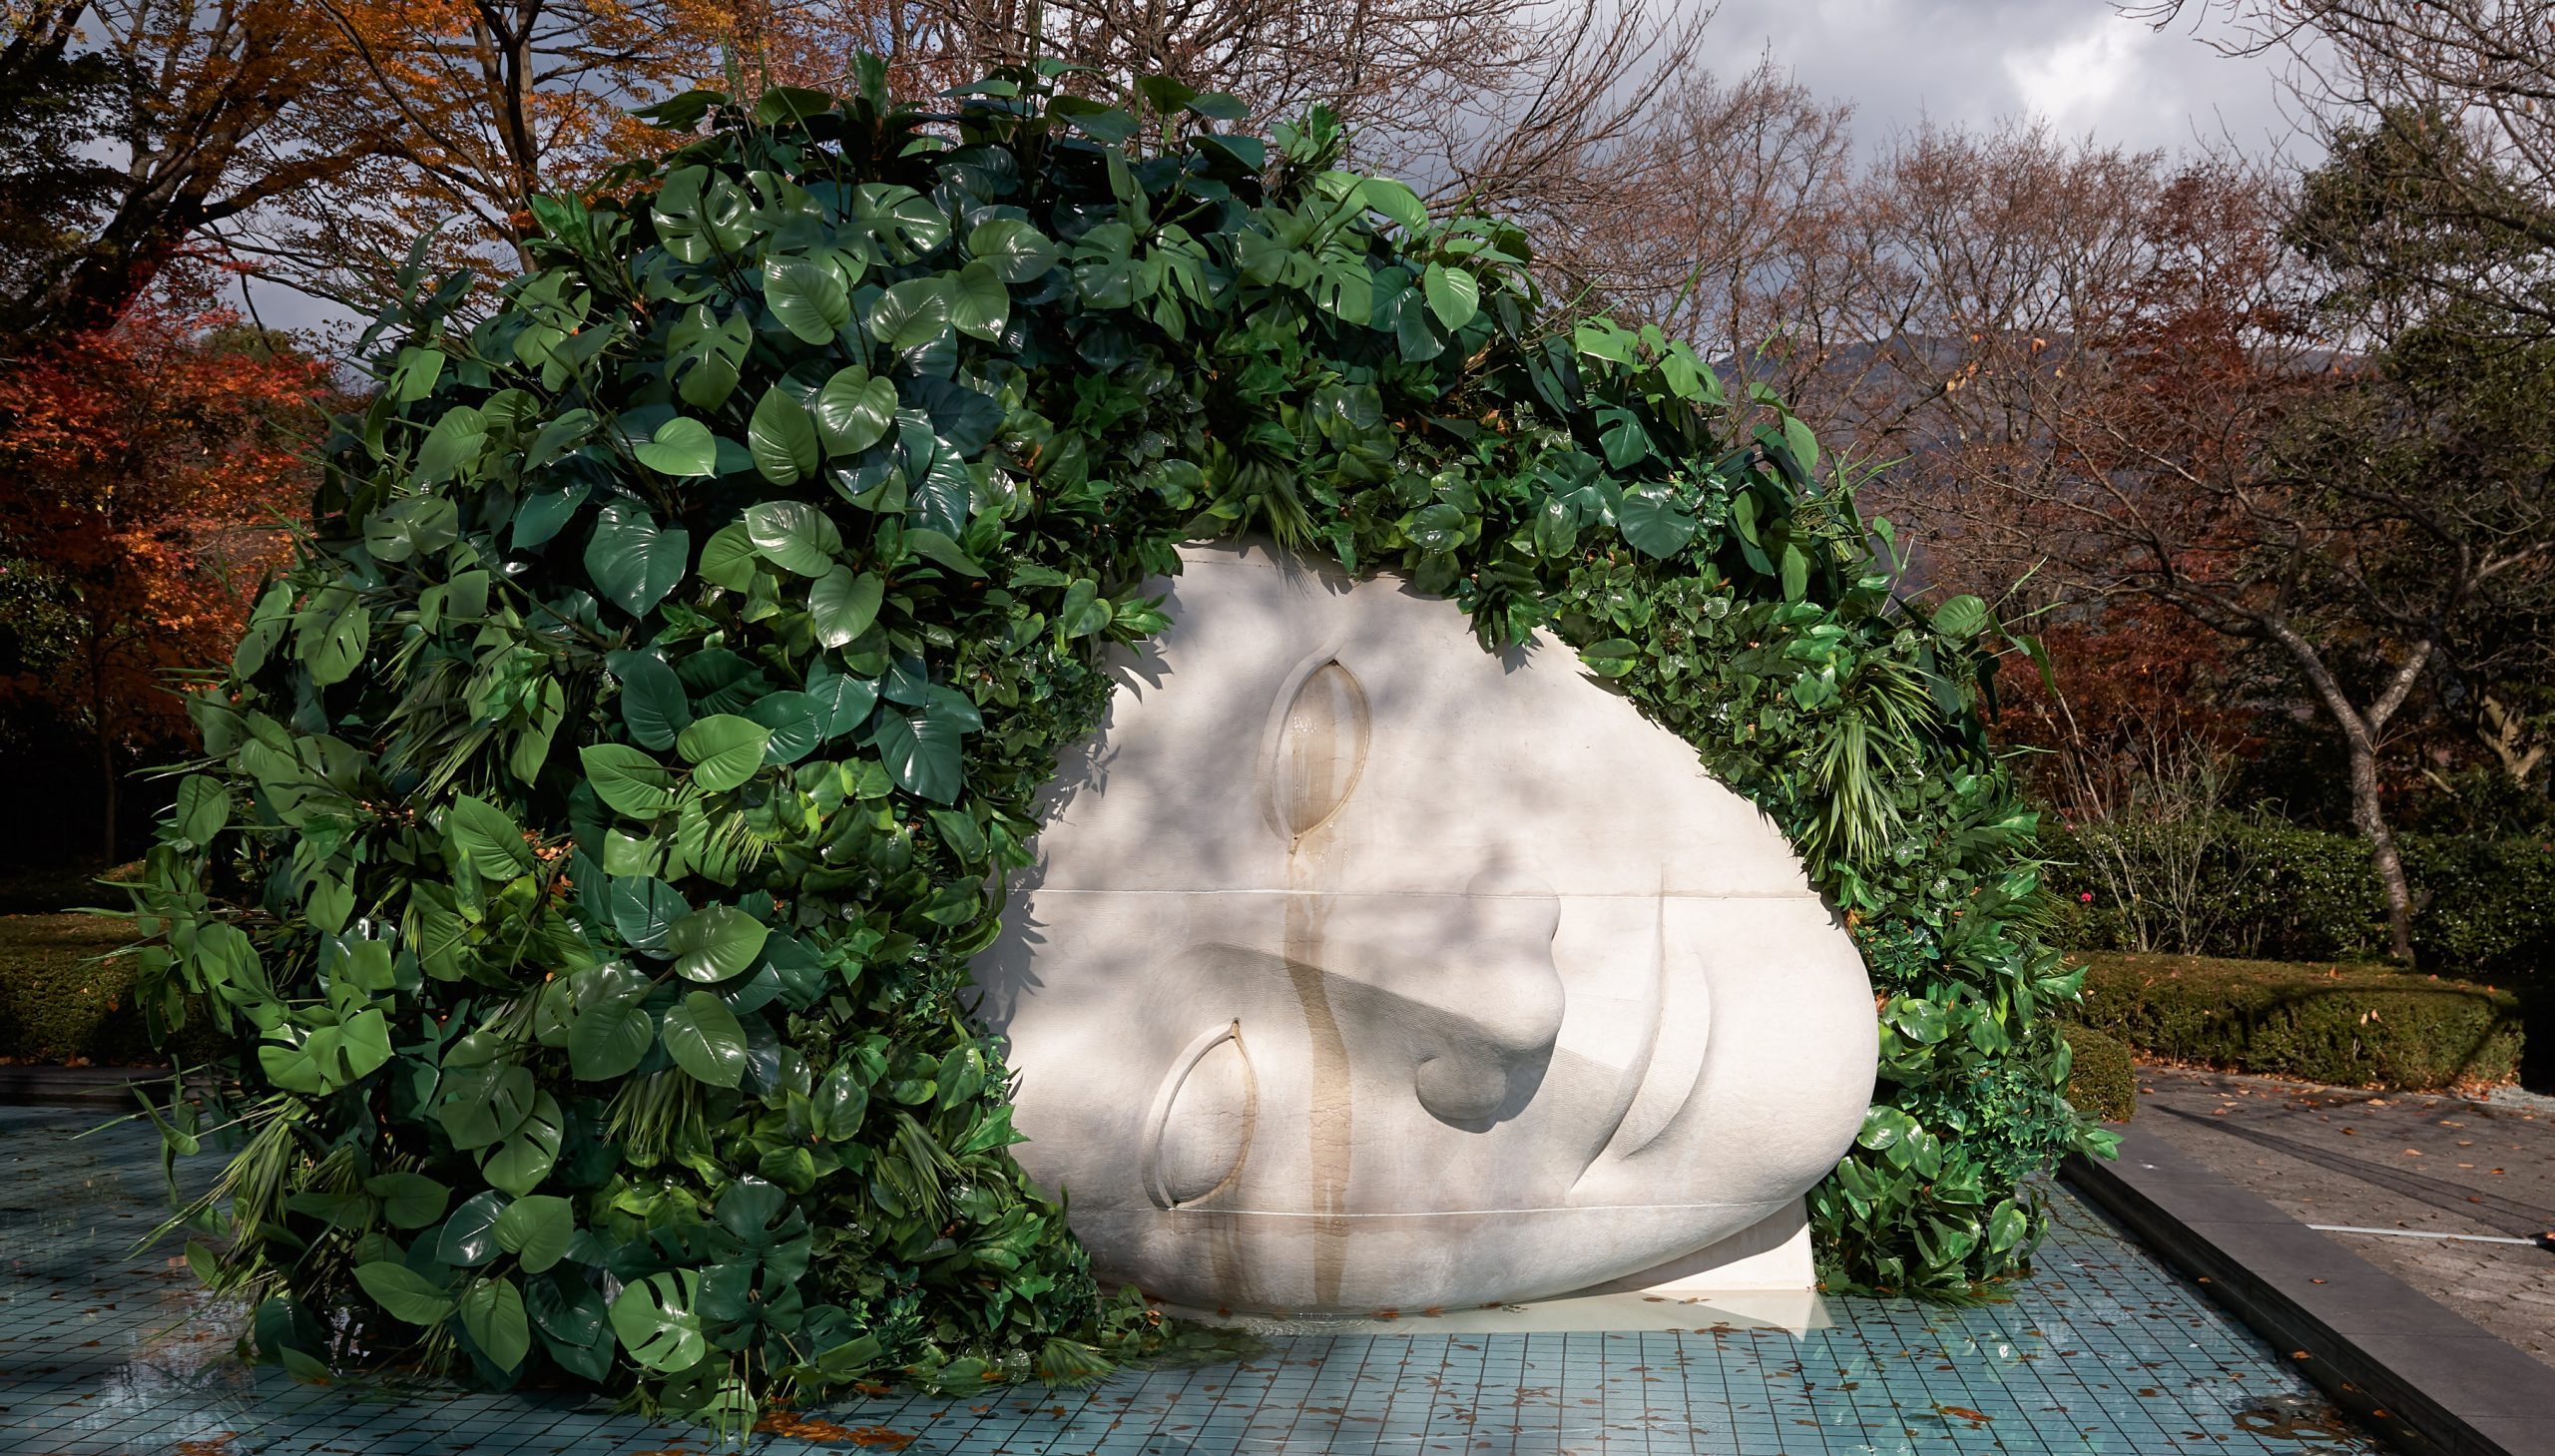 8 sculpture gardens you have to see to believe